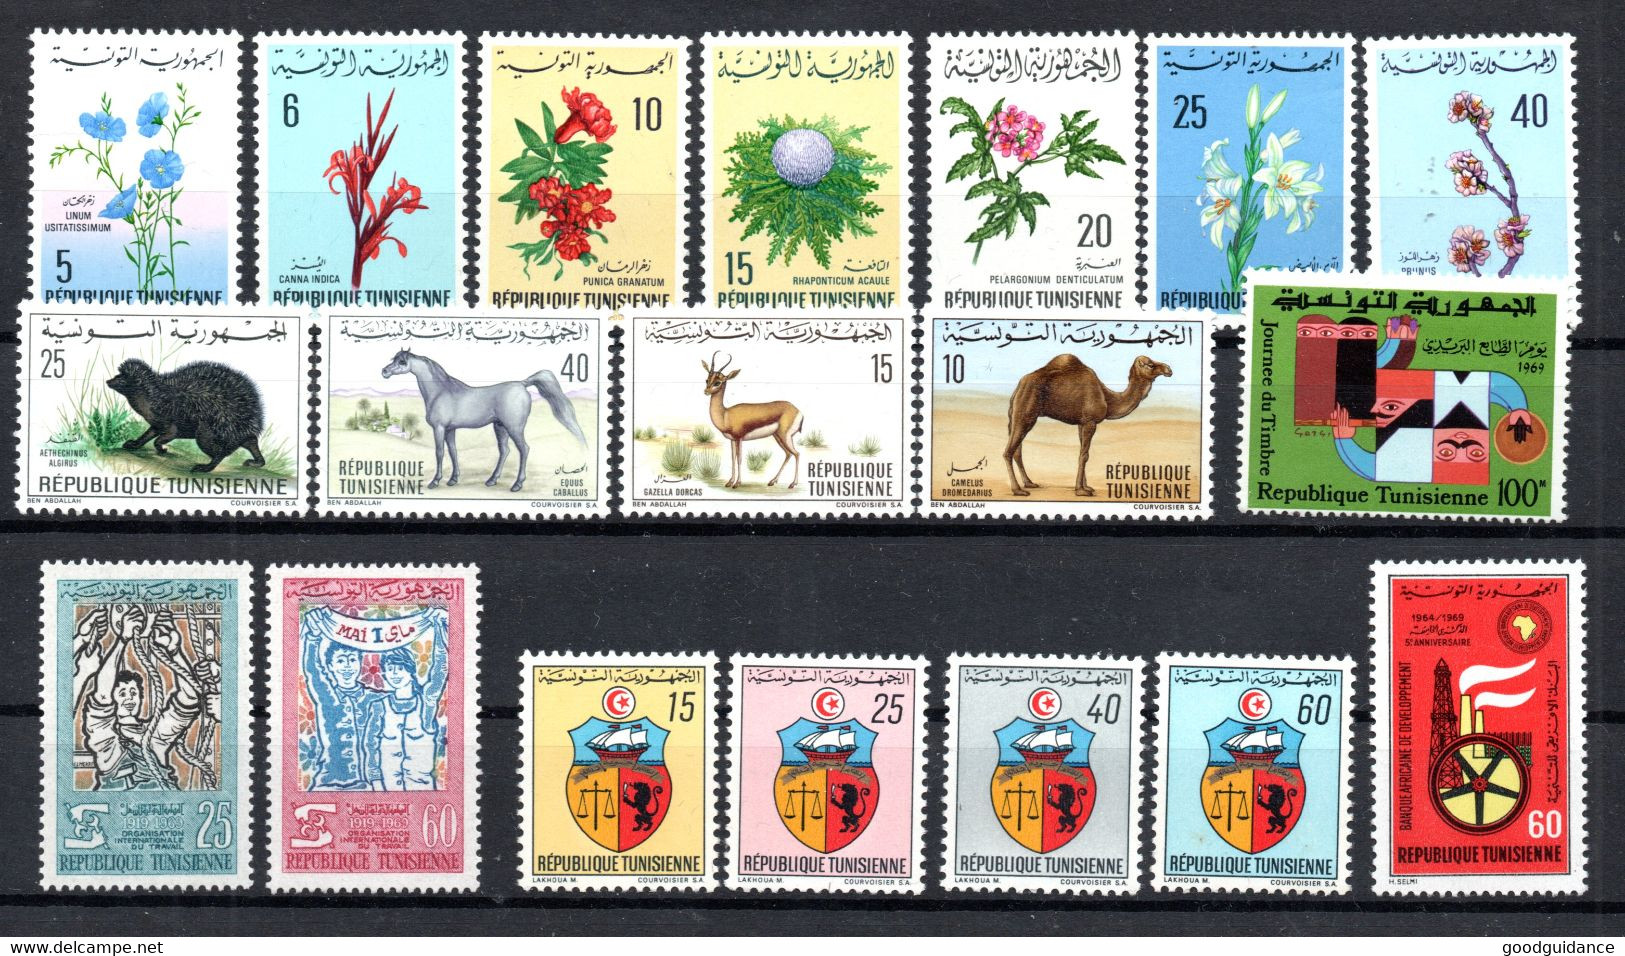 1969 - Tunisia- Tunisie- Full Year- Année Complète- 19 Stamps- 19 Timbres MNH** - Tunisia